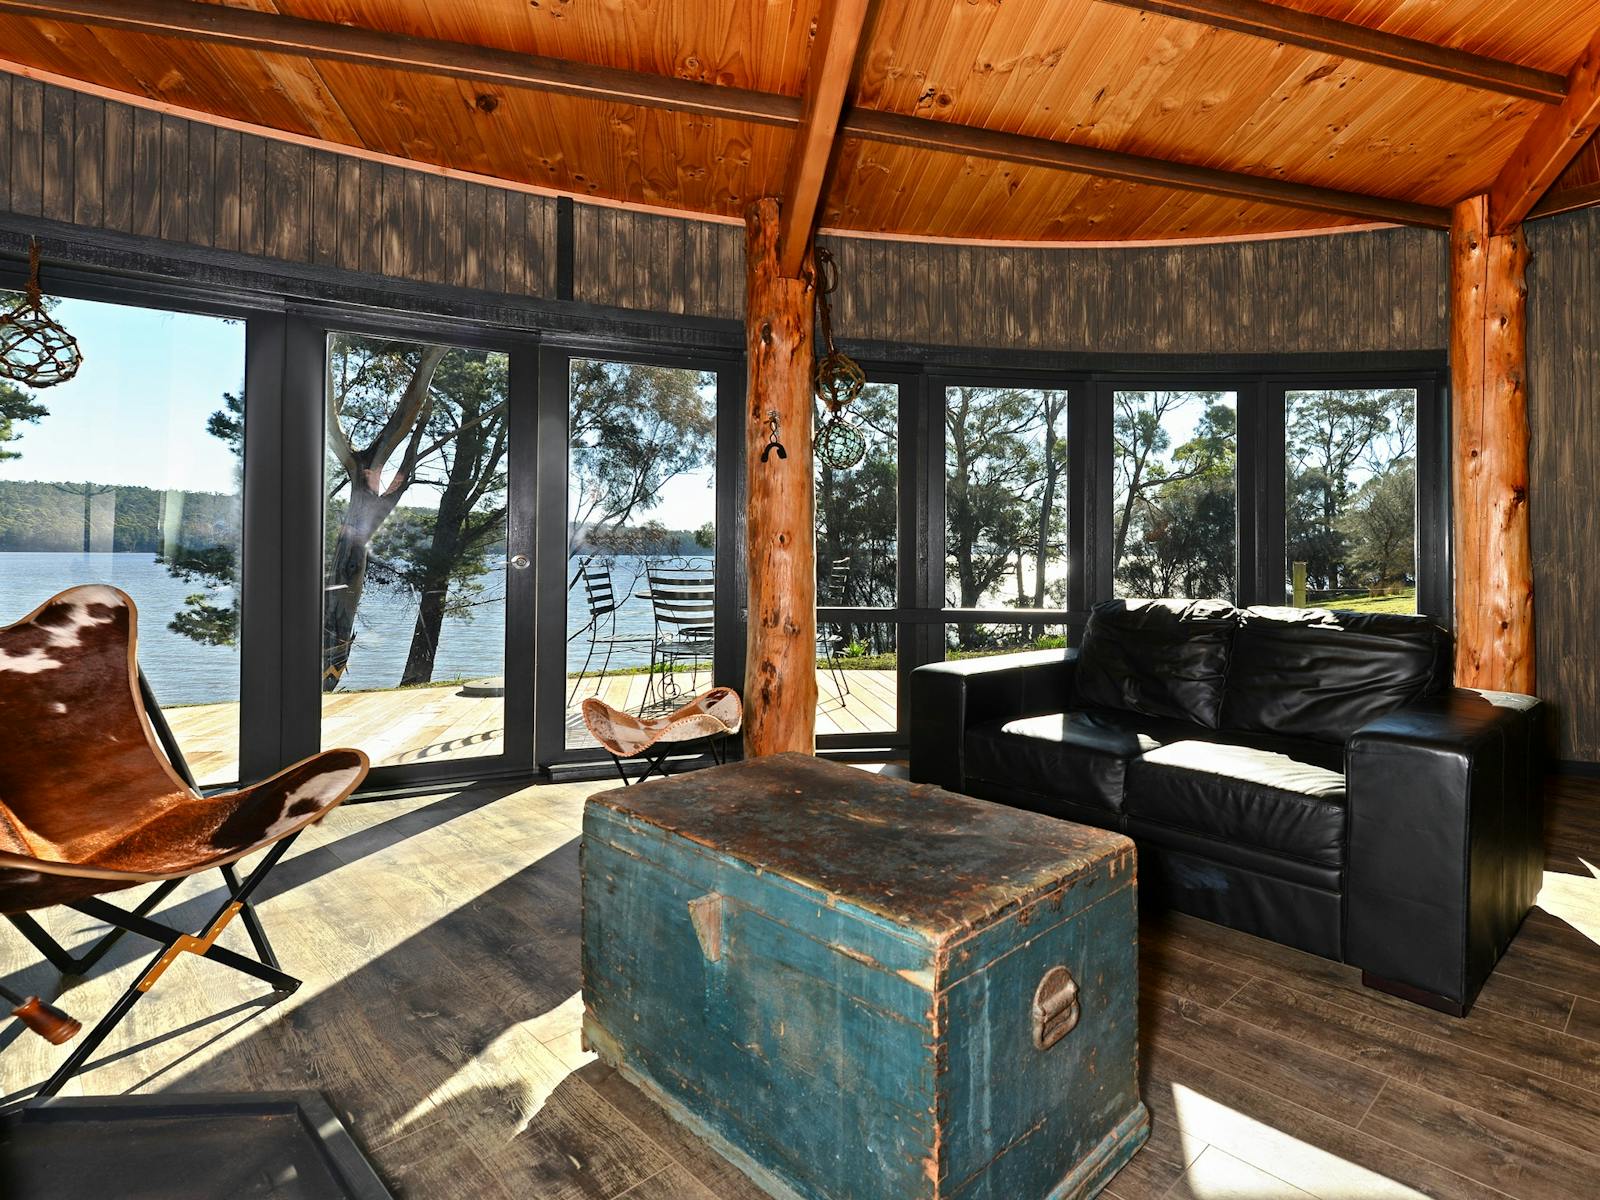 Taylors Bay Cottage: open plan lounge area with view of Taylors Bay.